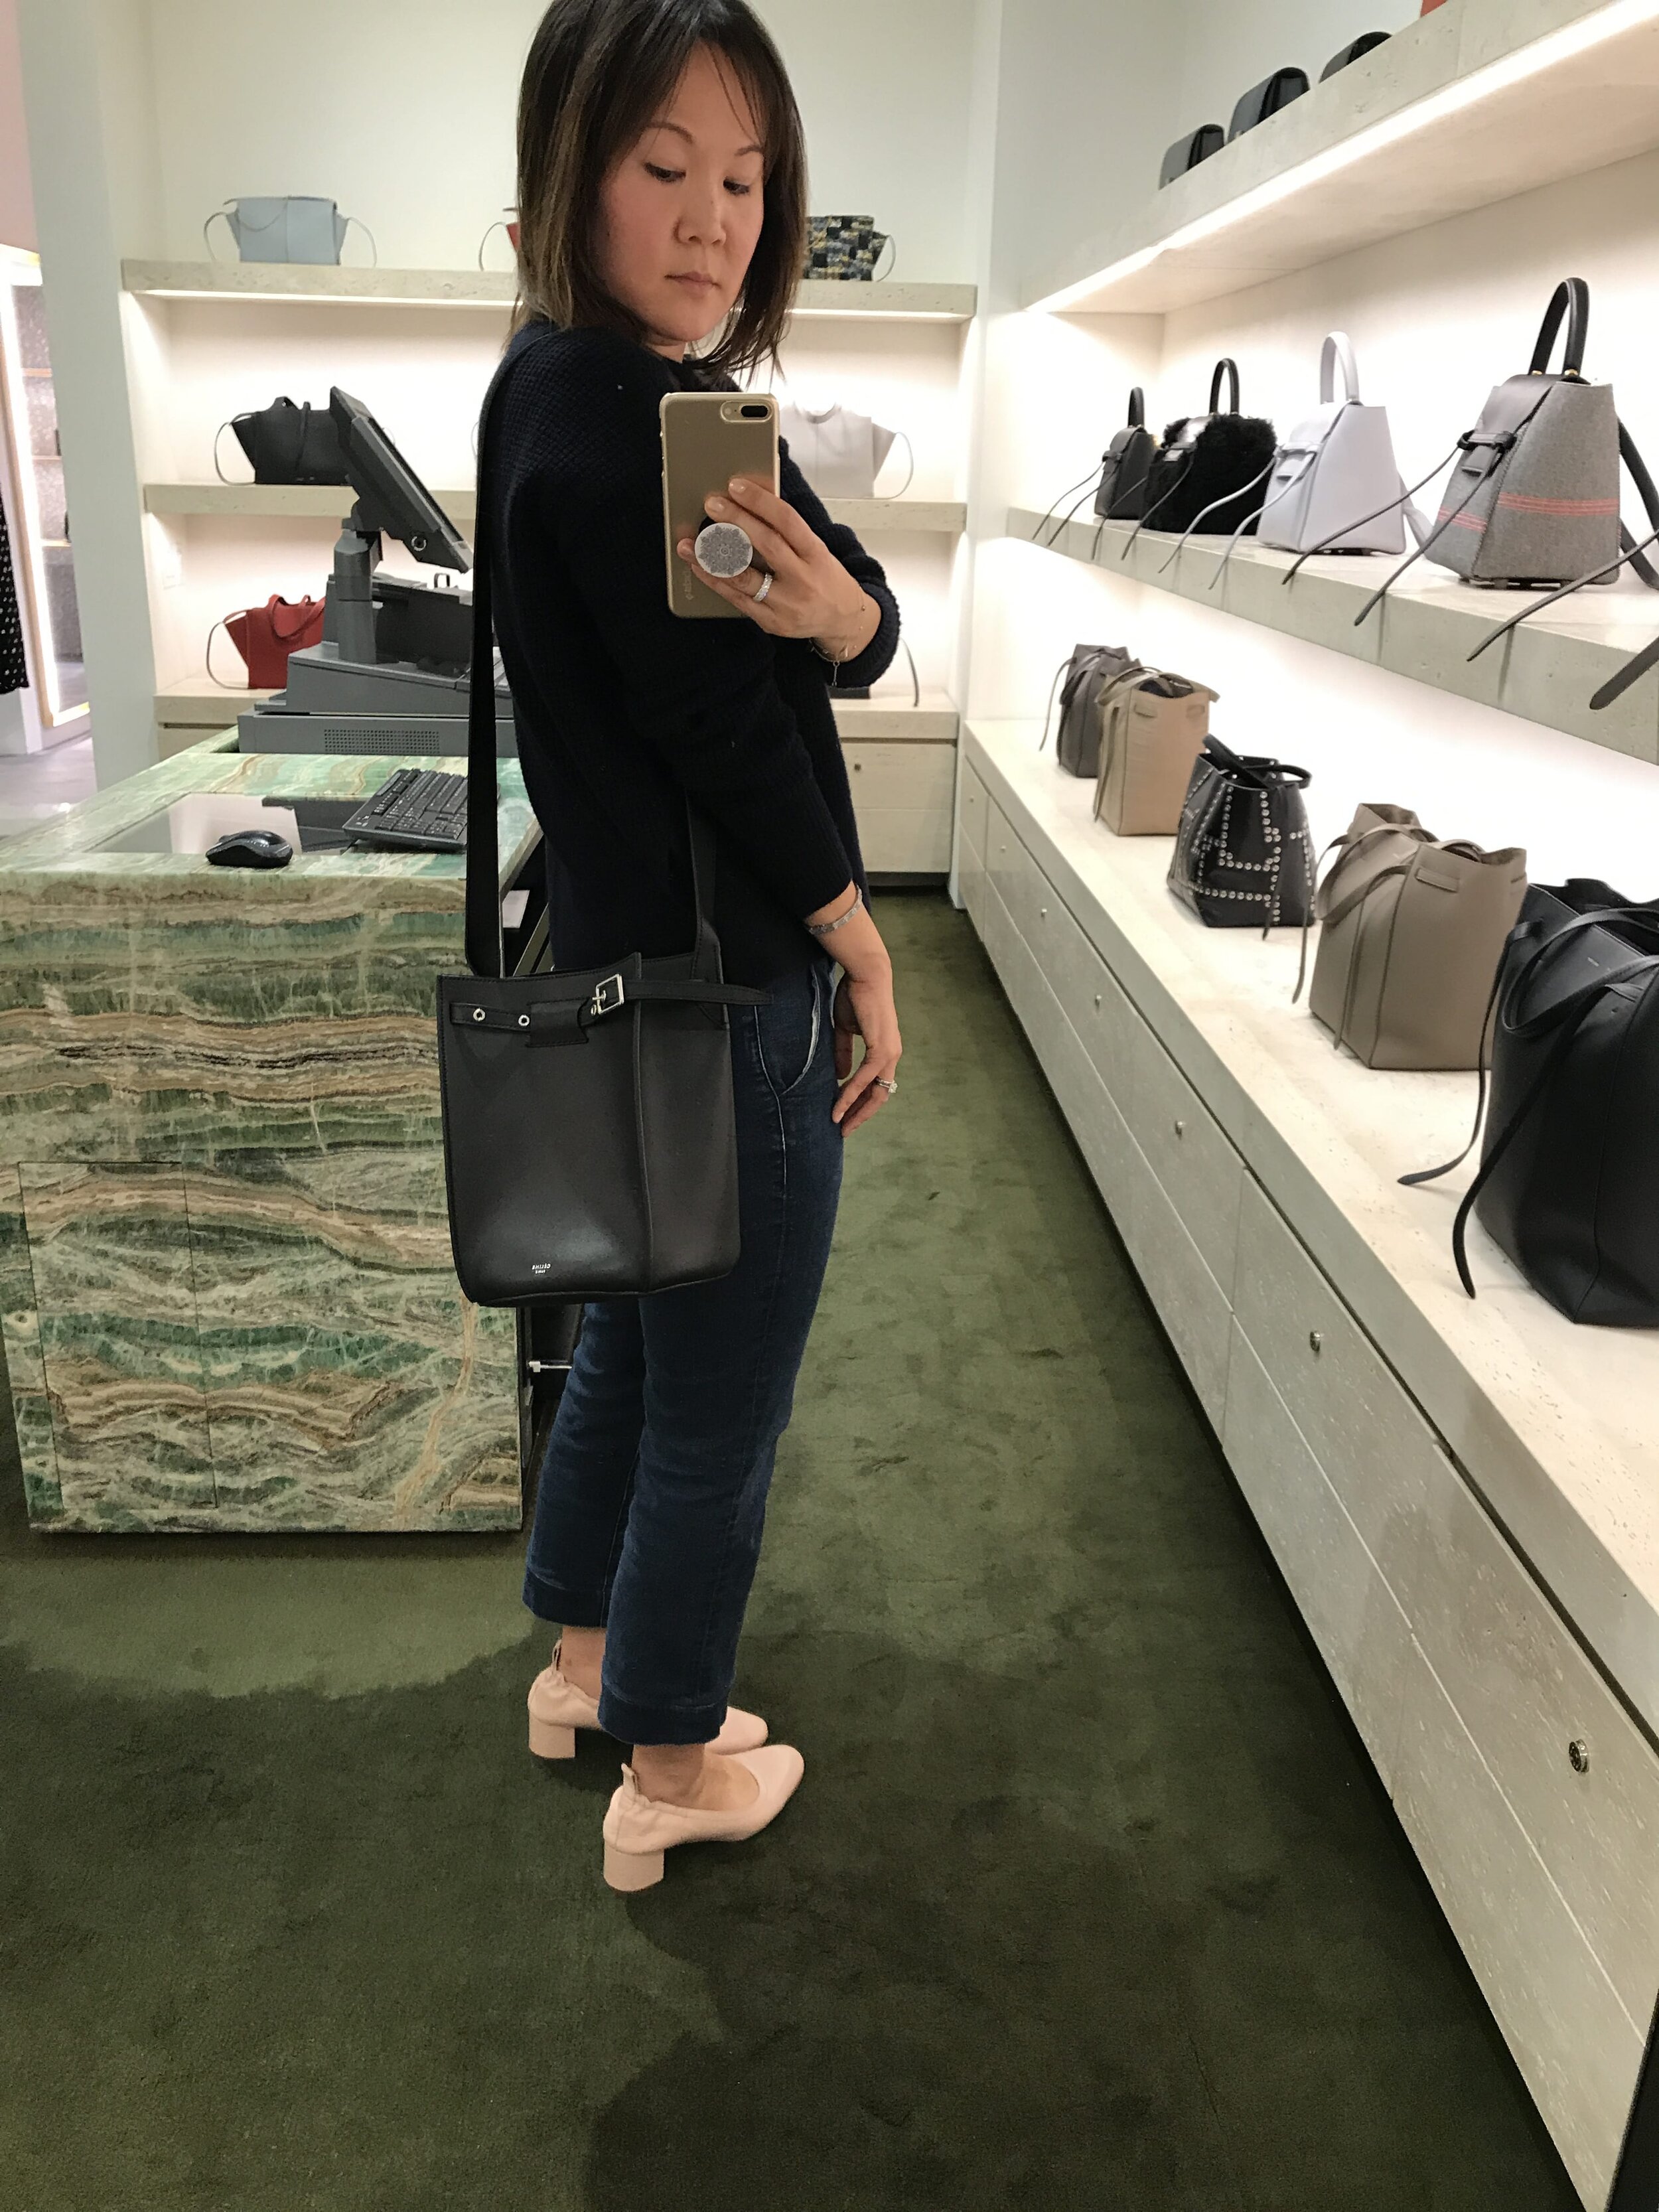 The Celine Bucket 16 Review